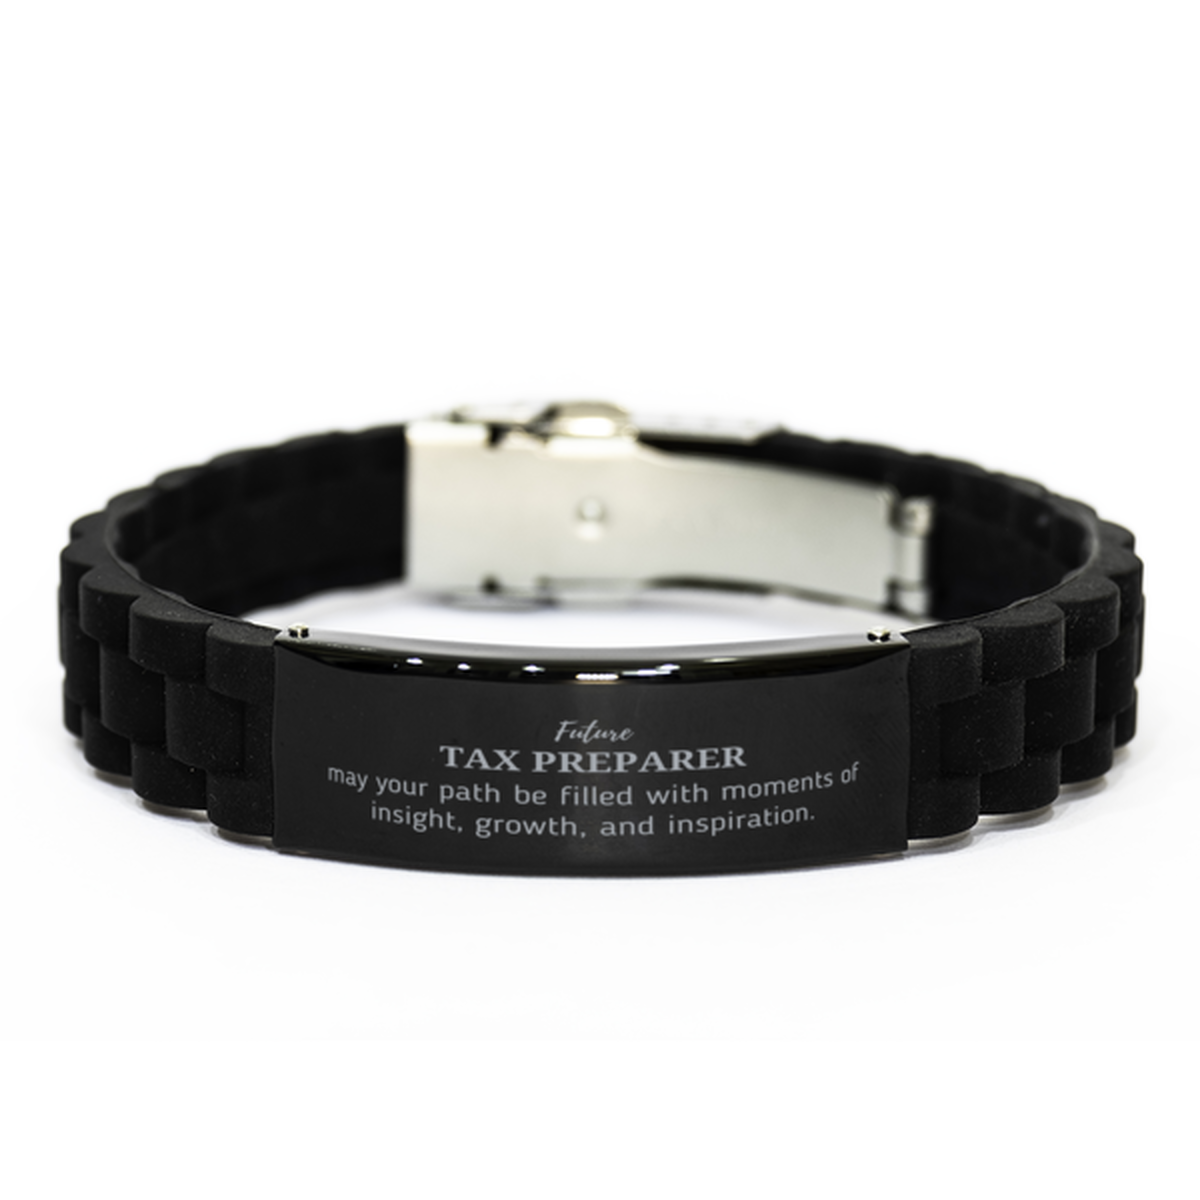 Future Tax Preparer Gifts, May your path be filled with moments of insight, Graduation Gifts for New Tax Preparer, Christmas Unique Black Glidelock Clasp Bracelet For Men, Women, Friends